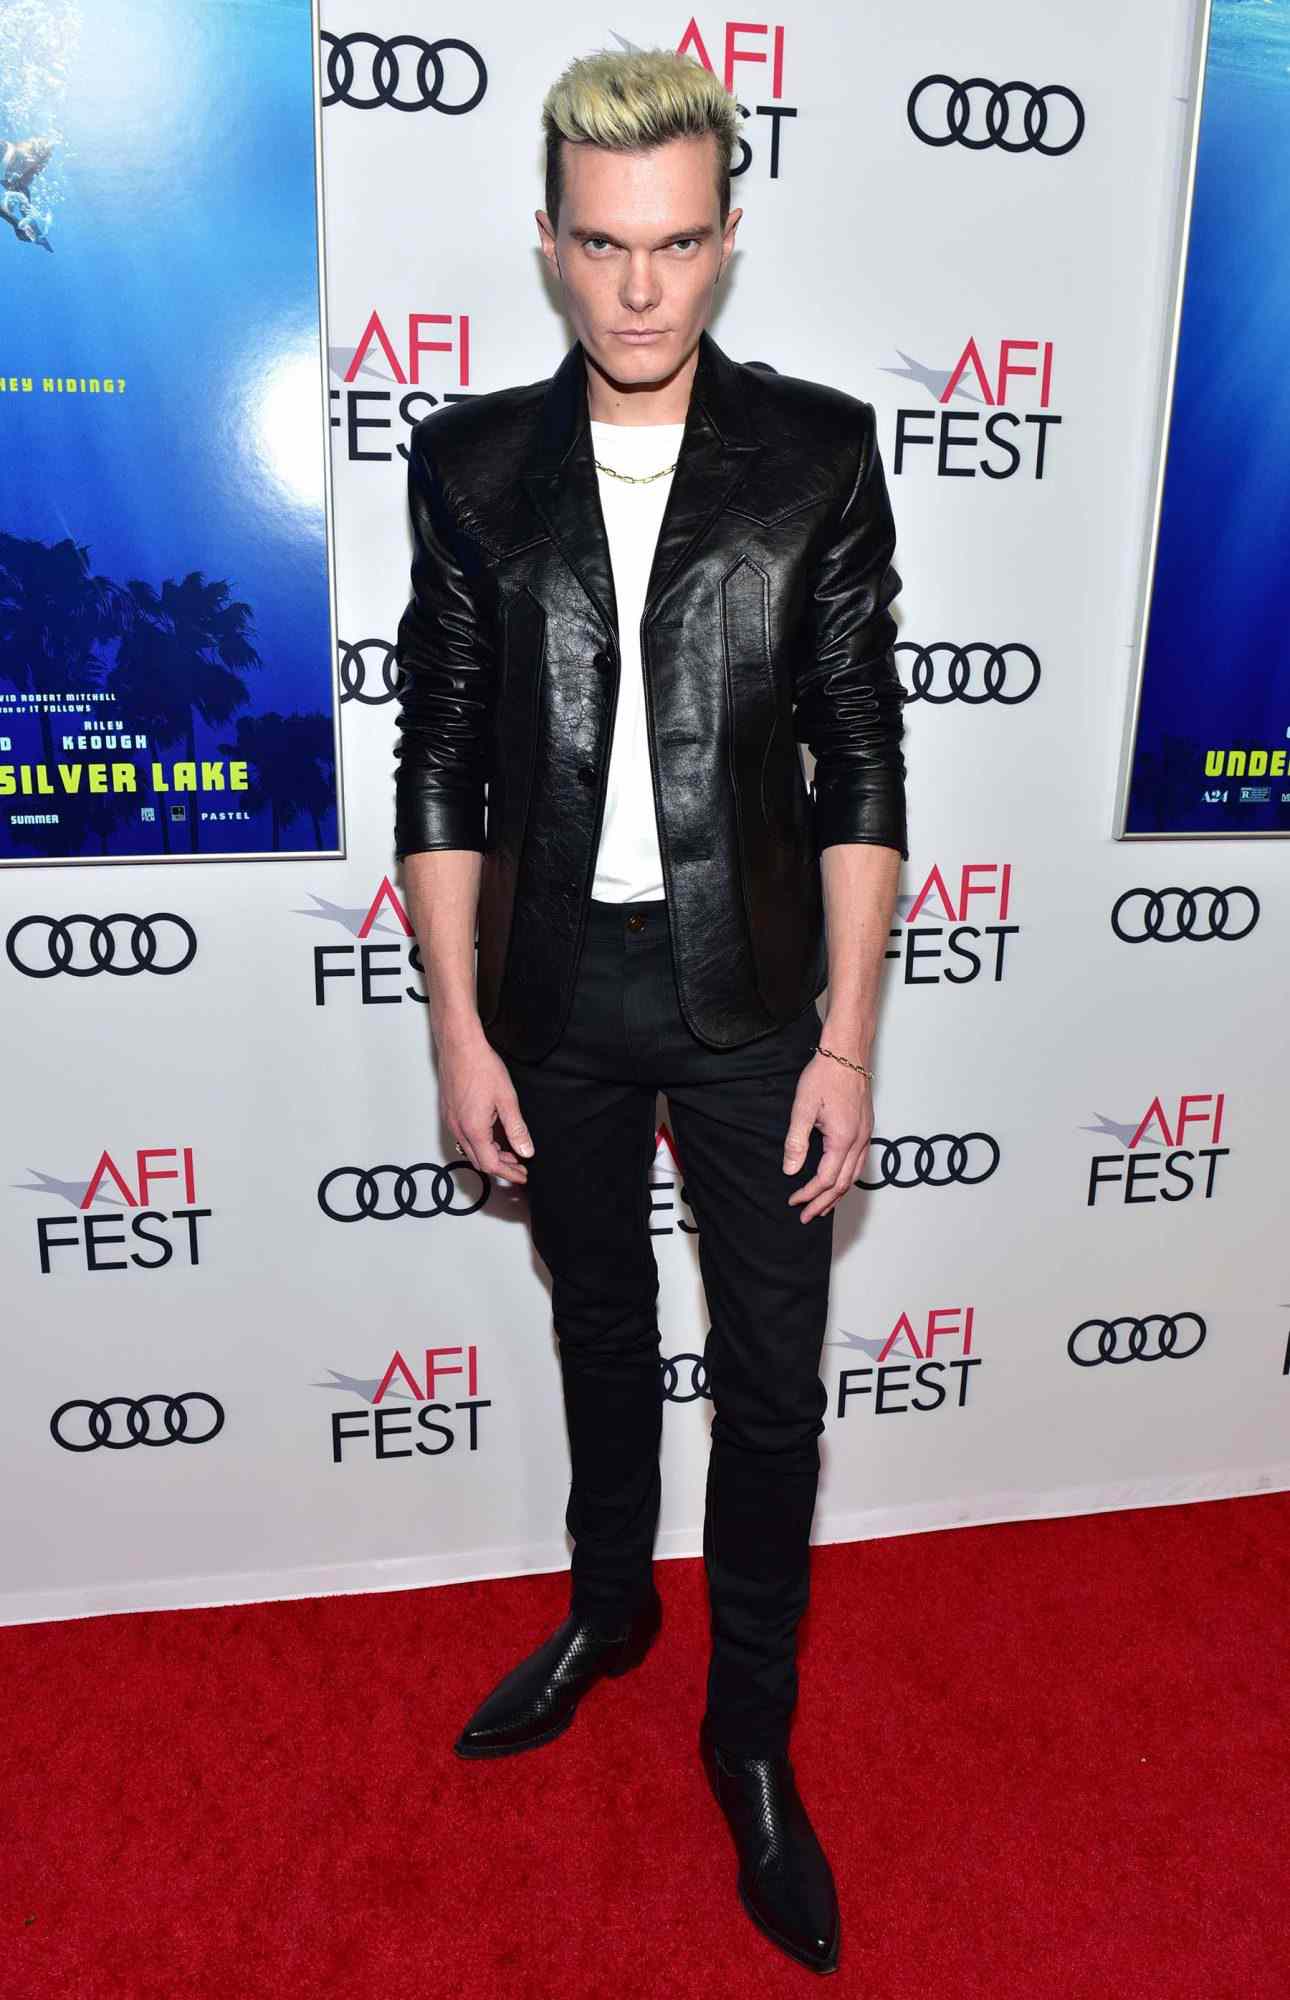 AFI FEST 2018 Presented By Audi - Screening Of "Under The Silver Lake" - Arrivals